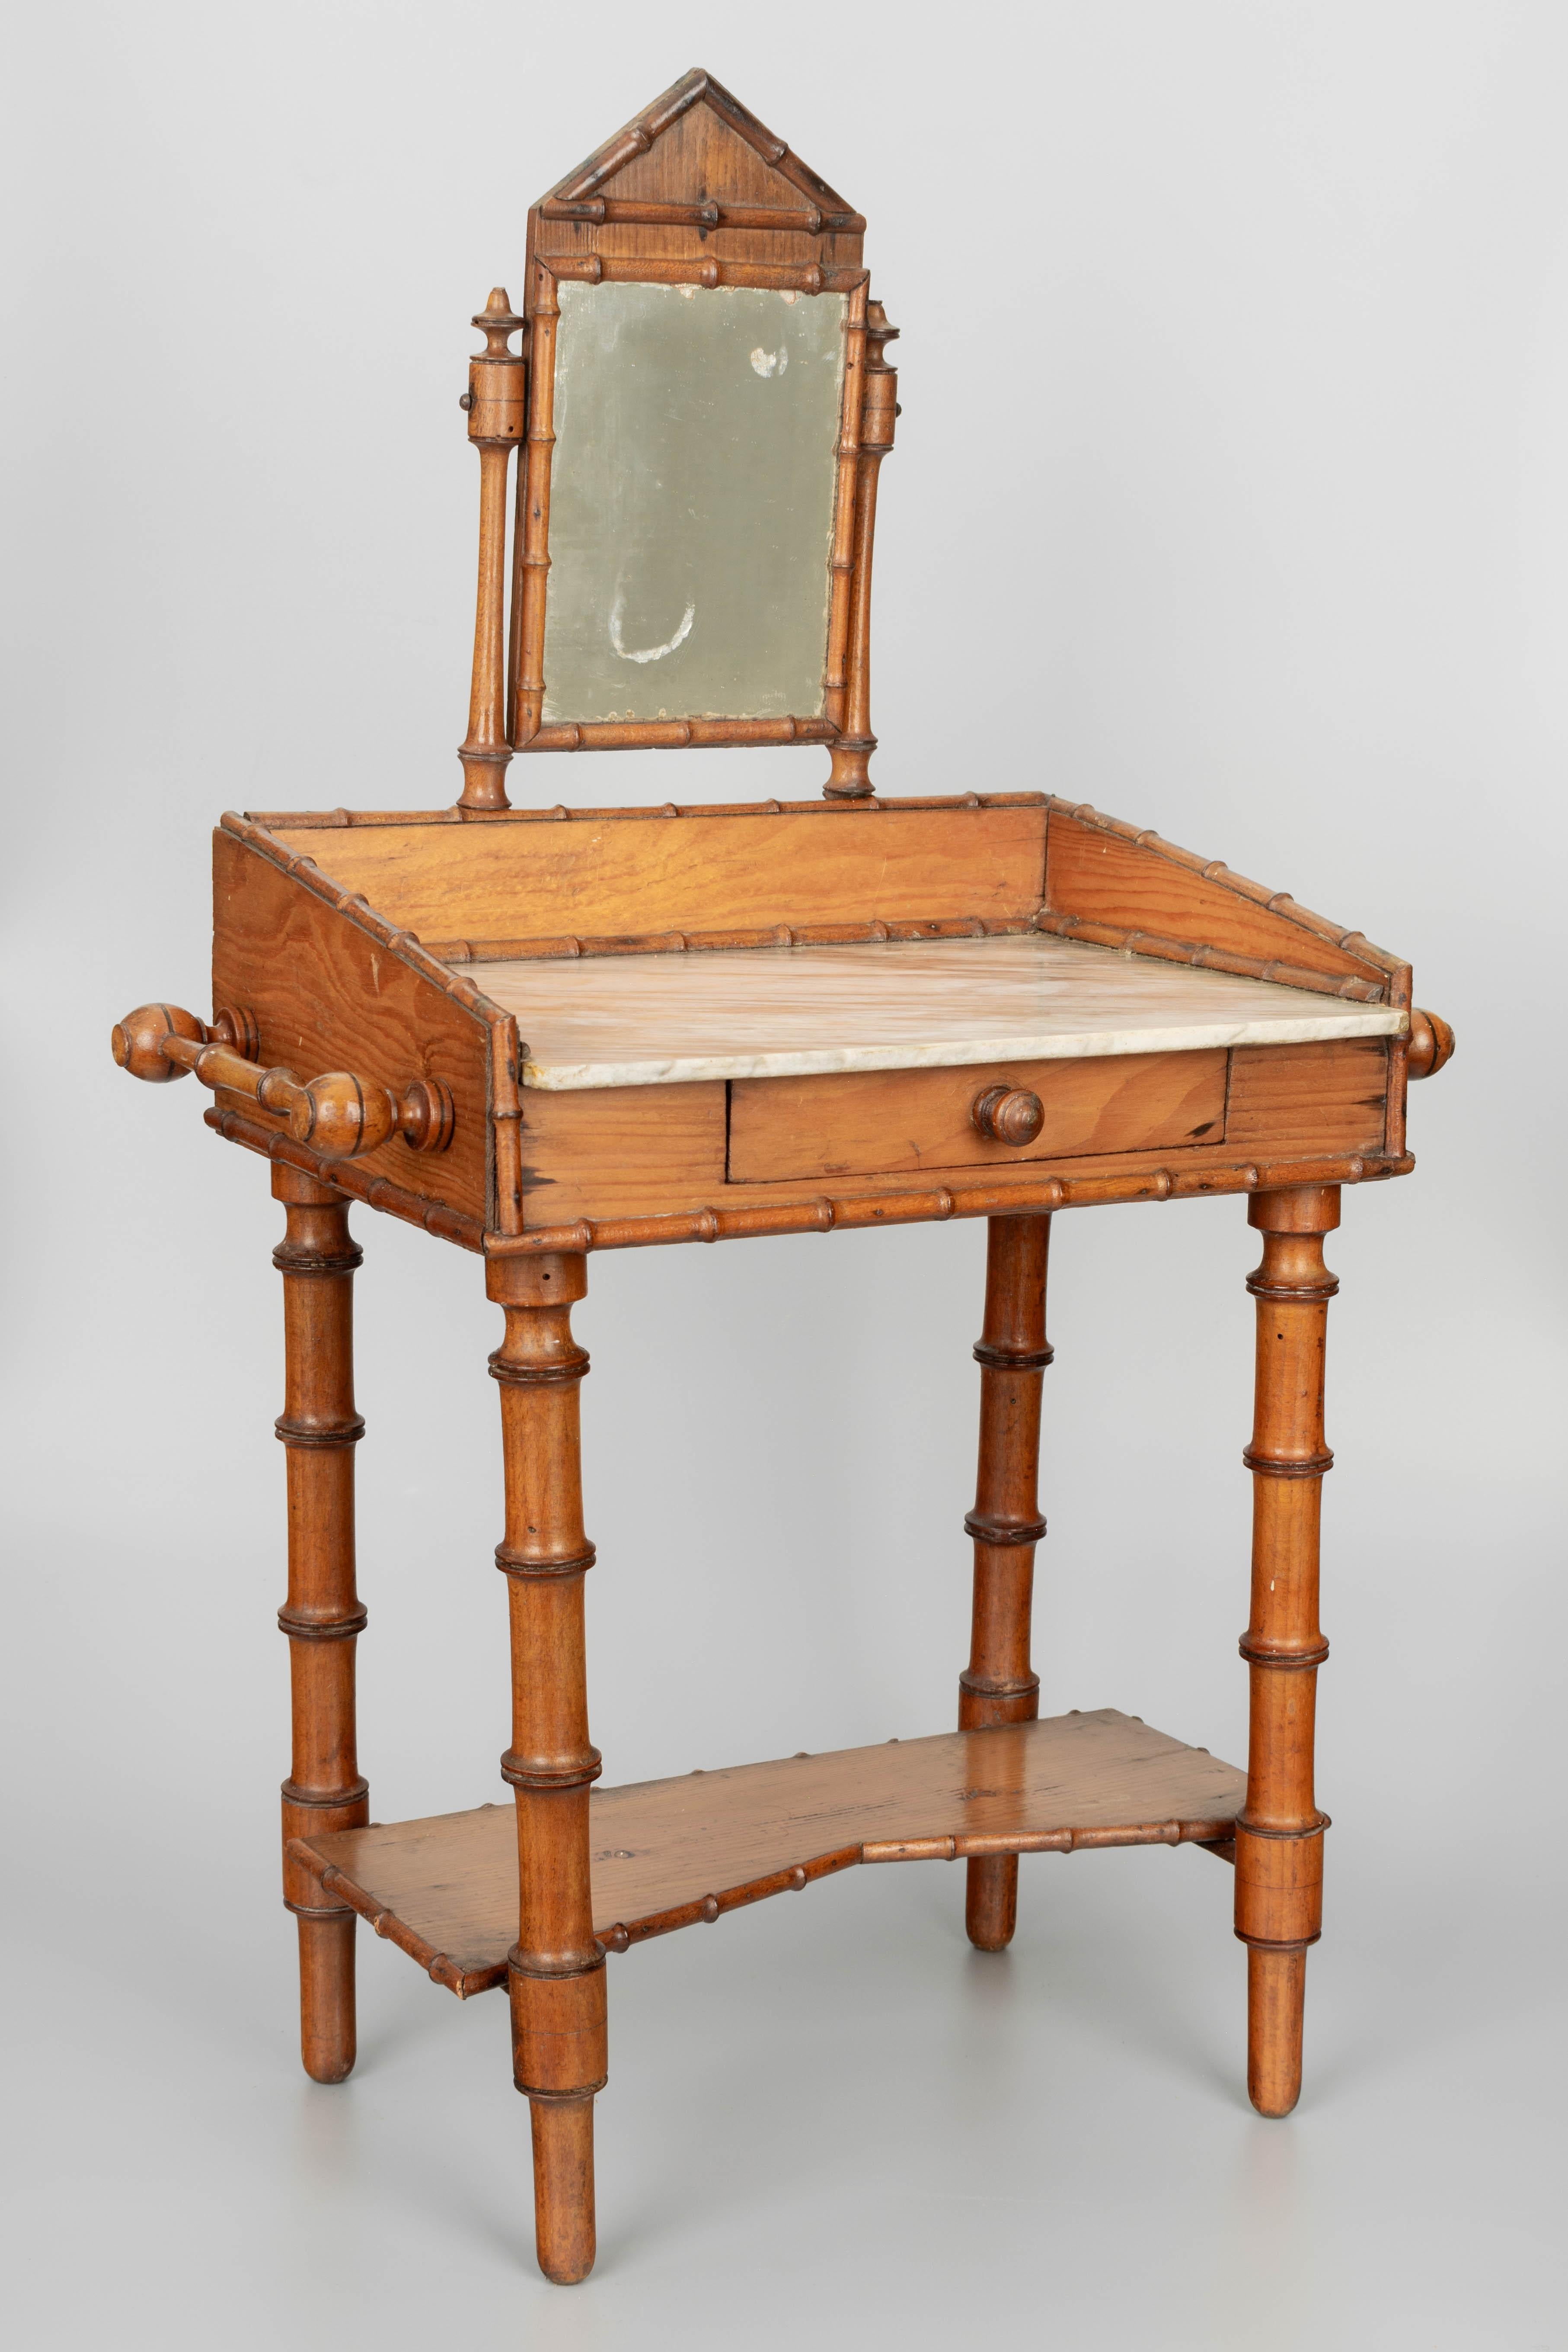 A late 19th century French miniature faux bamboo marble top doll furniture wash stand with pivoting vanity mirror. Made of pitch pine and cherry wood with a small drawer, towel bars on the sides and a shelf below. Circa 1890-1920.
Overall dimensions